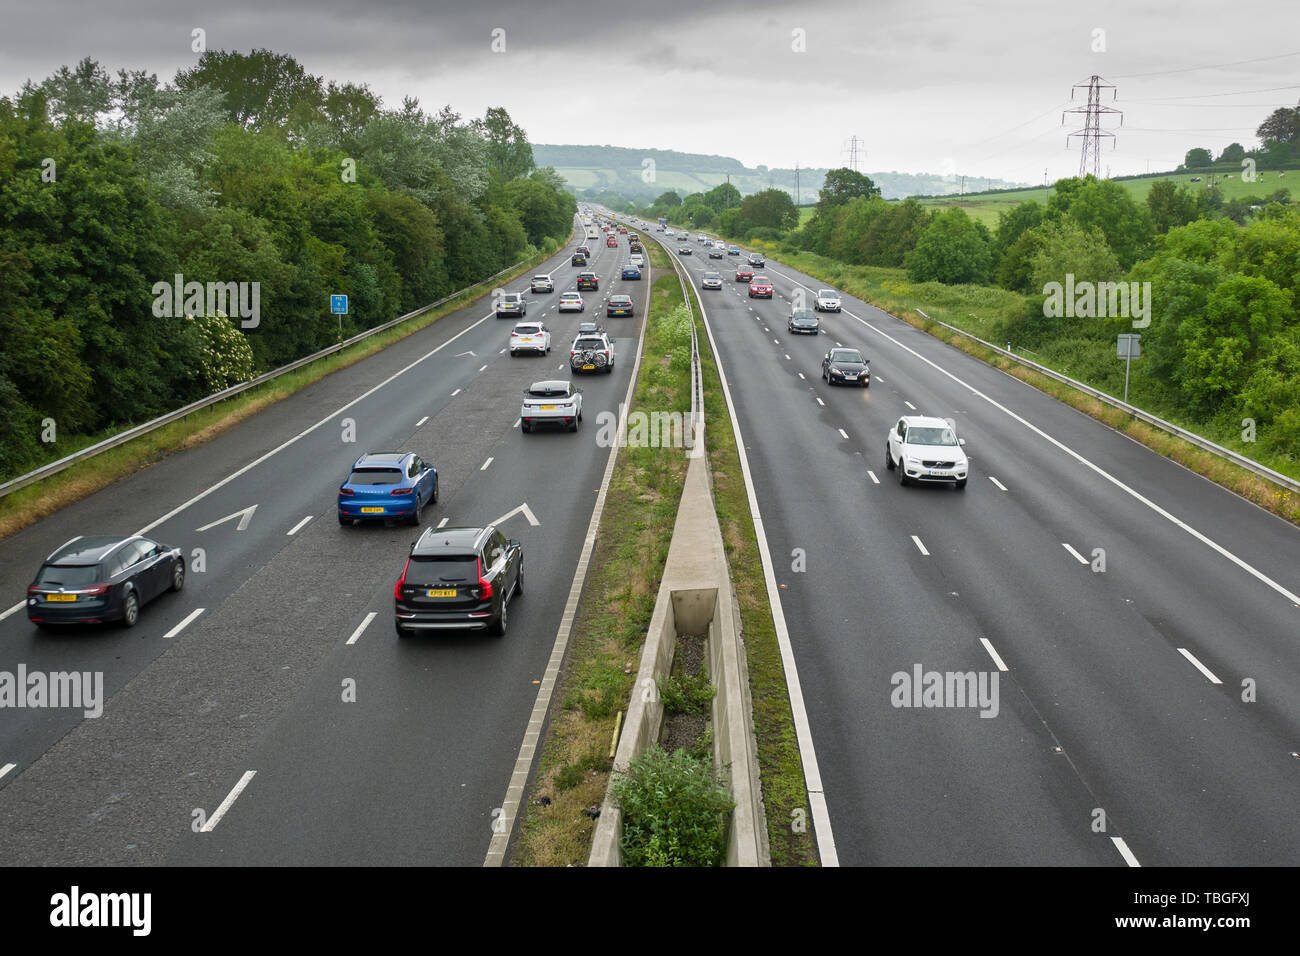 Holiday traffic on the M5 motorway near Weston-super-Mare, North Somerset, England. Stock Photo